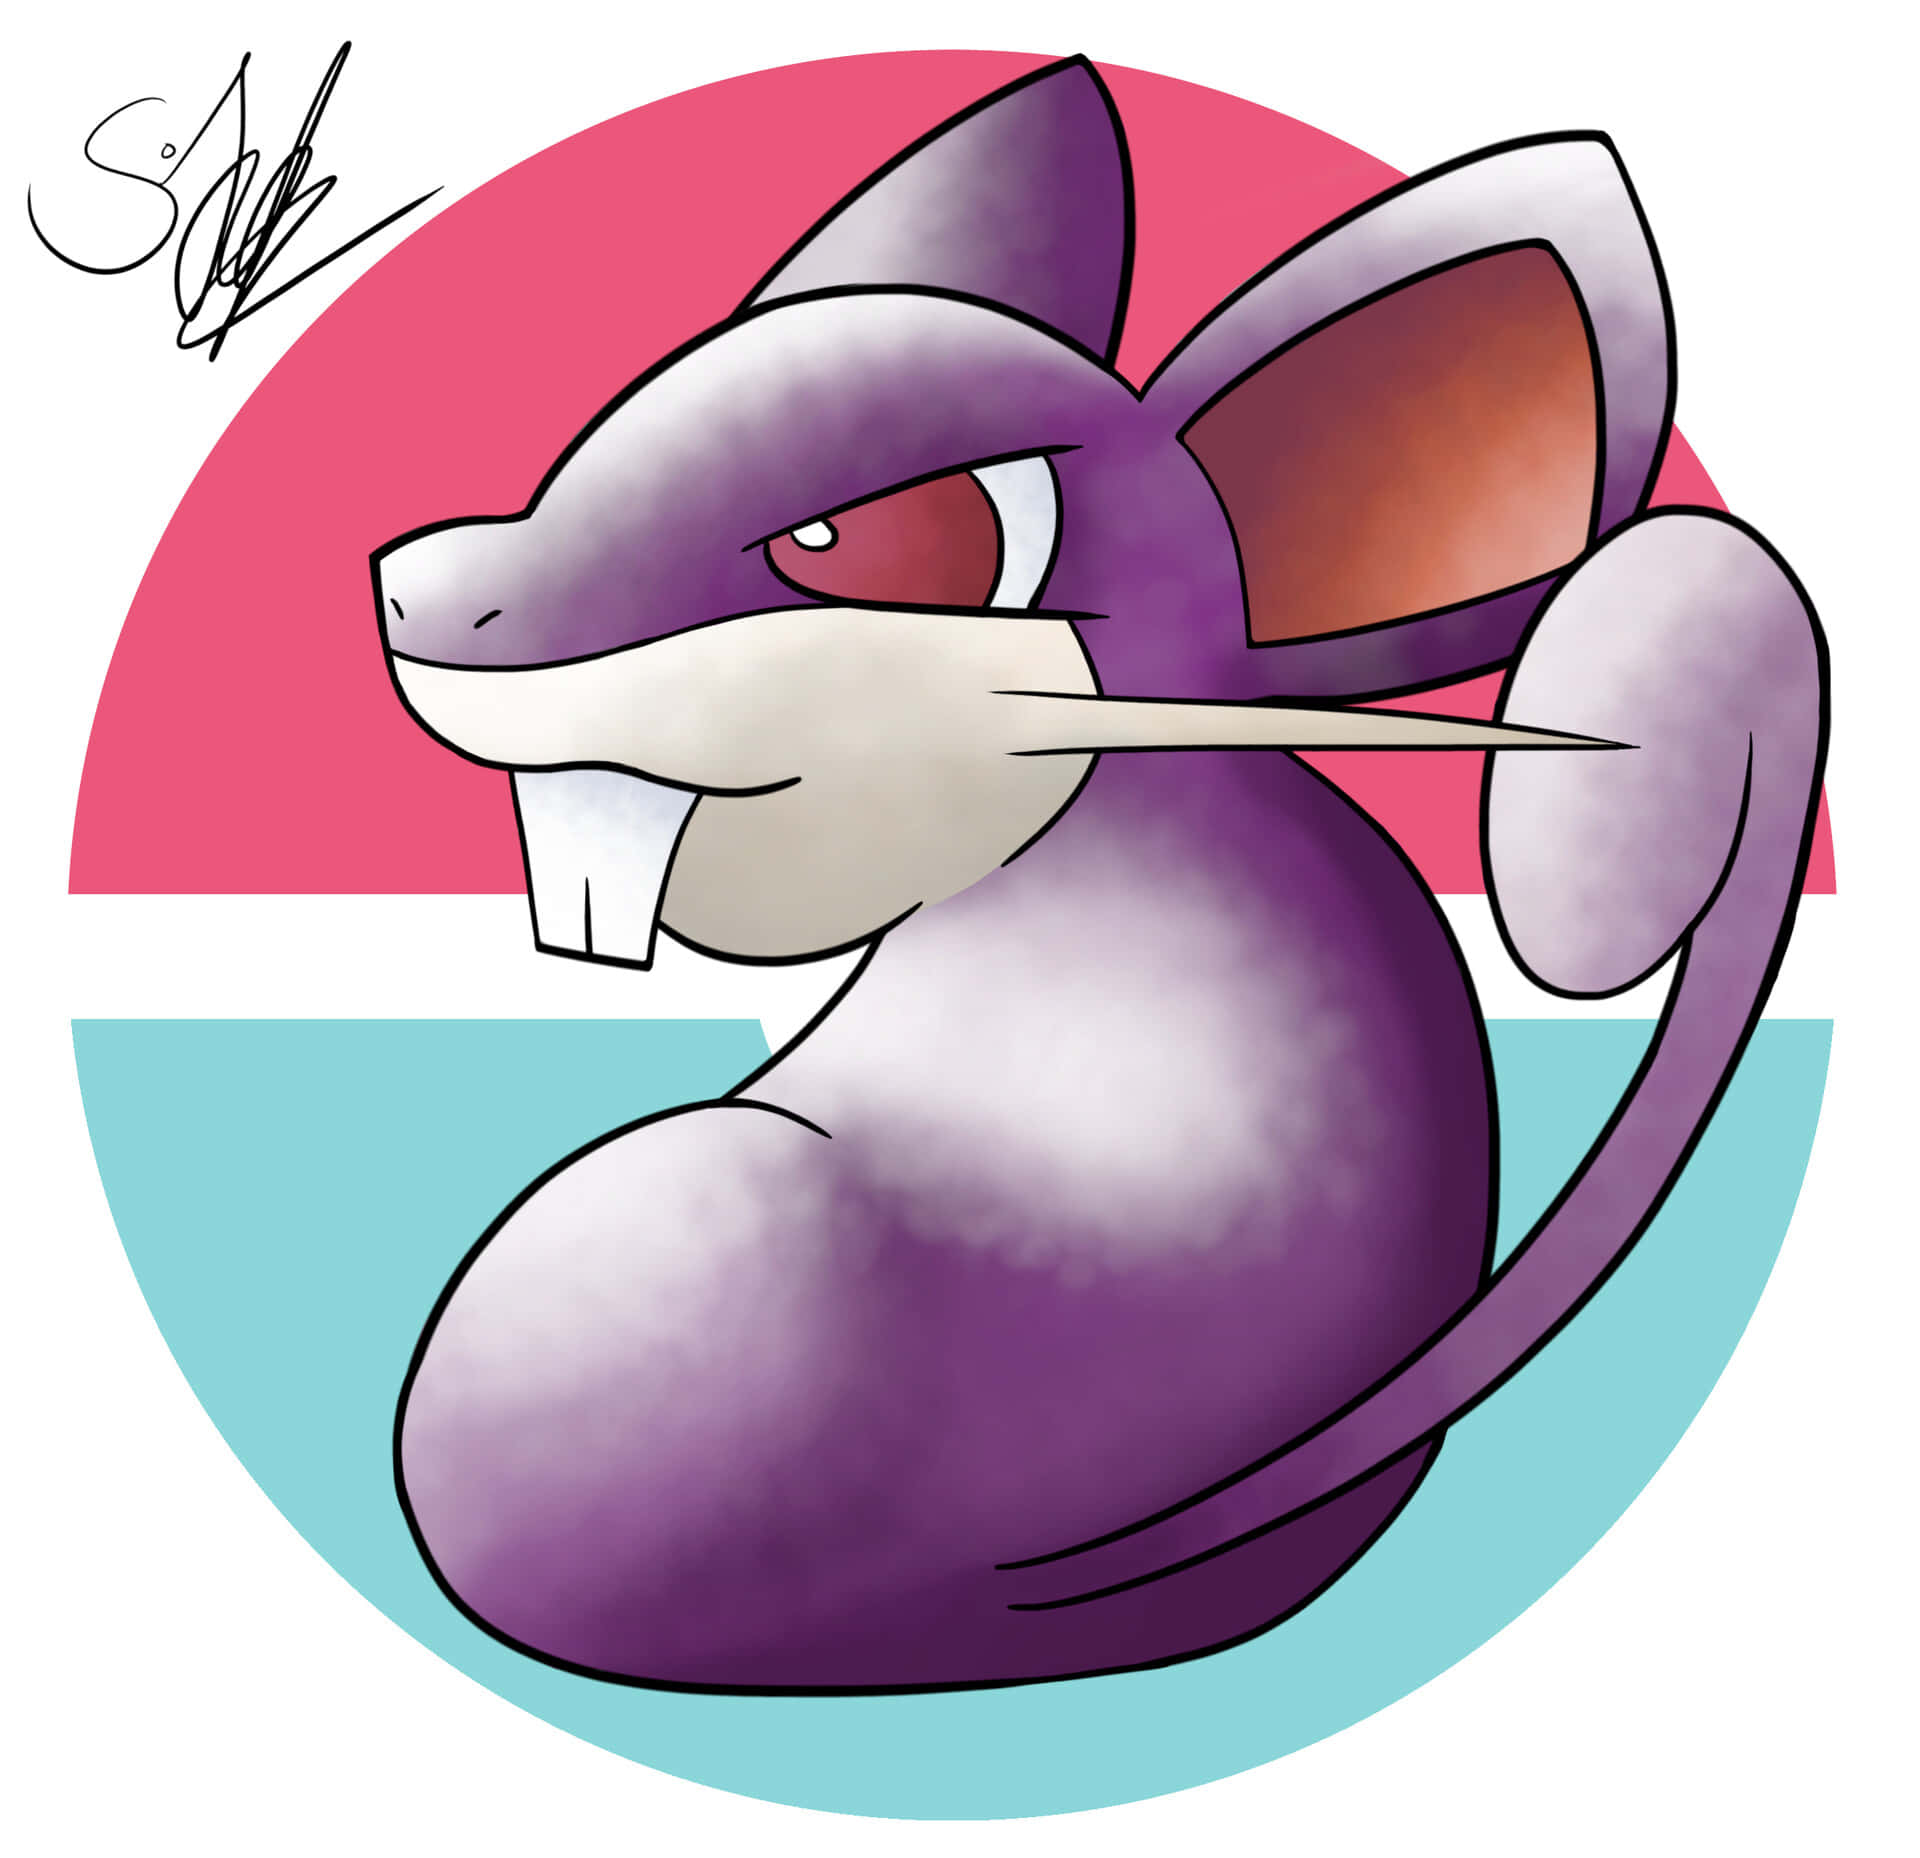 Illustration Of Rattata On Circle Background Of Pink And Aqua Blue Wallpaper